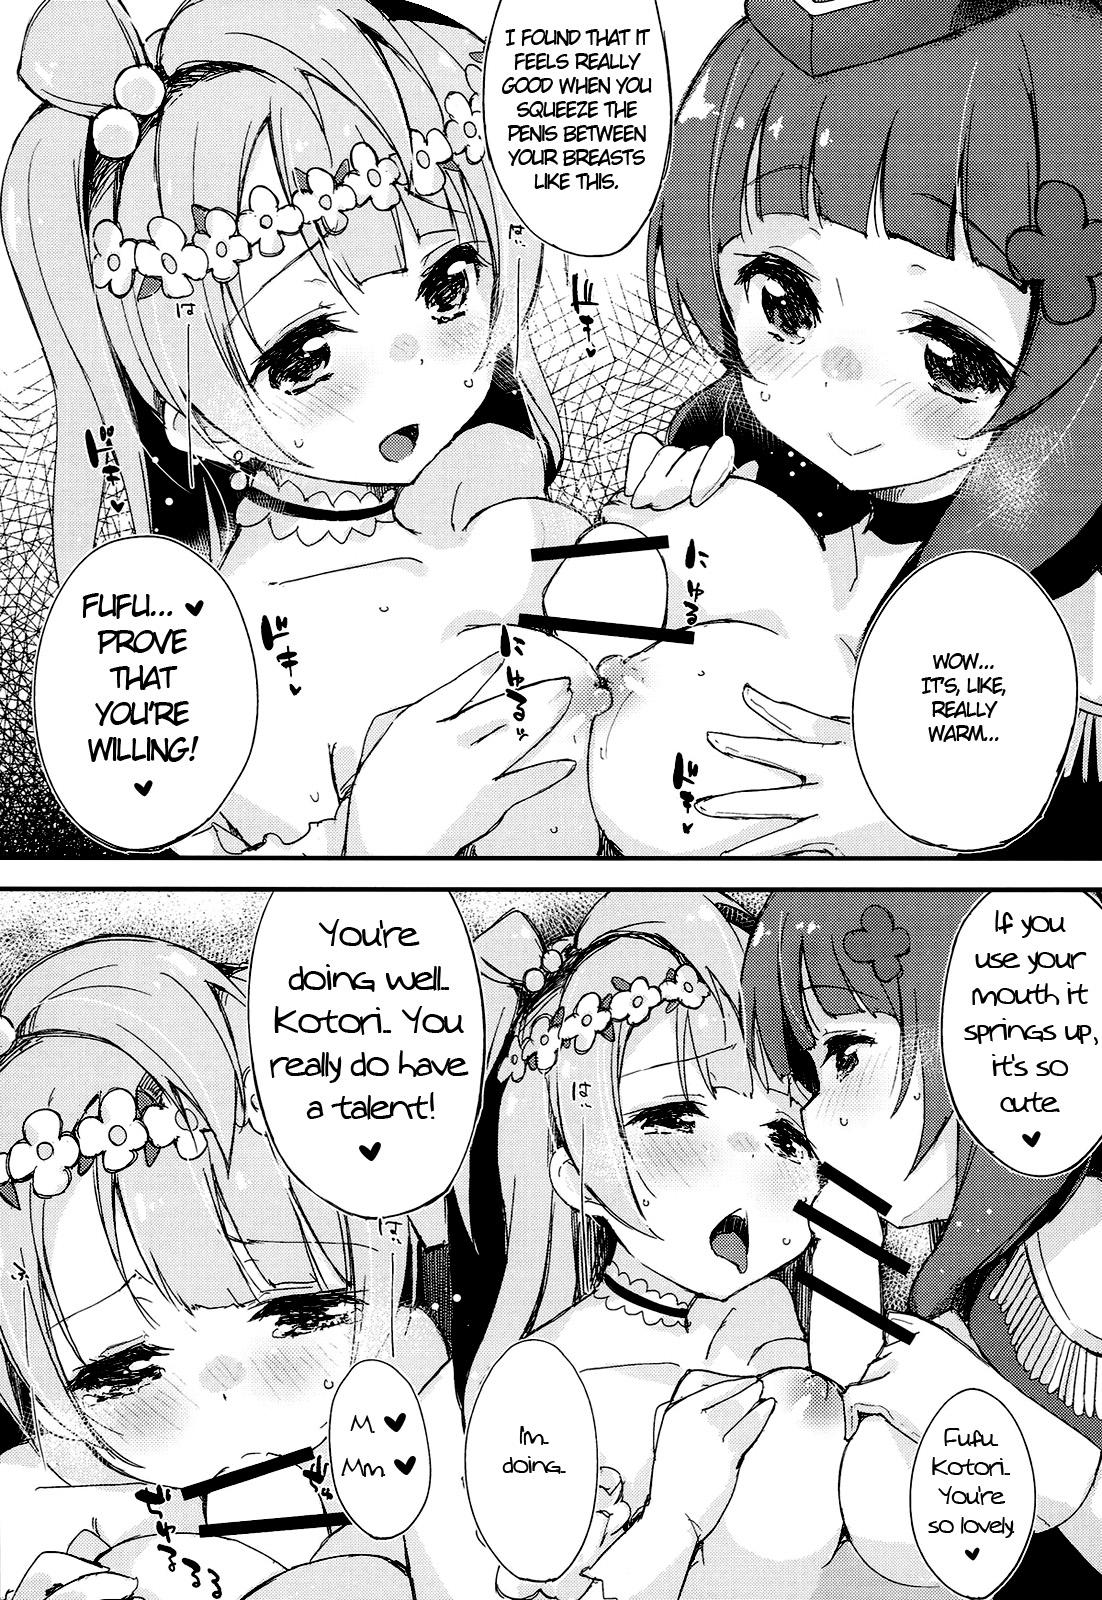 Polish Shocking Party!! - Love live Transexual - Page 9